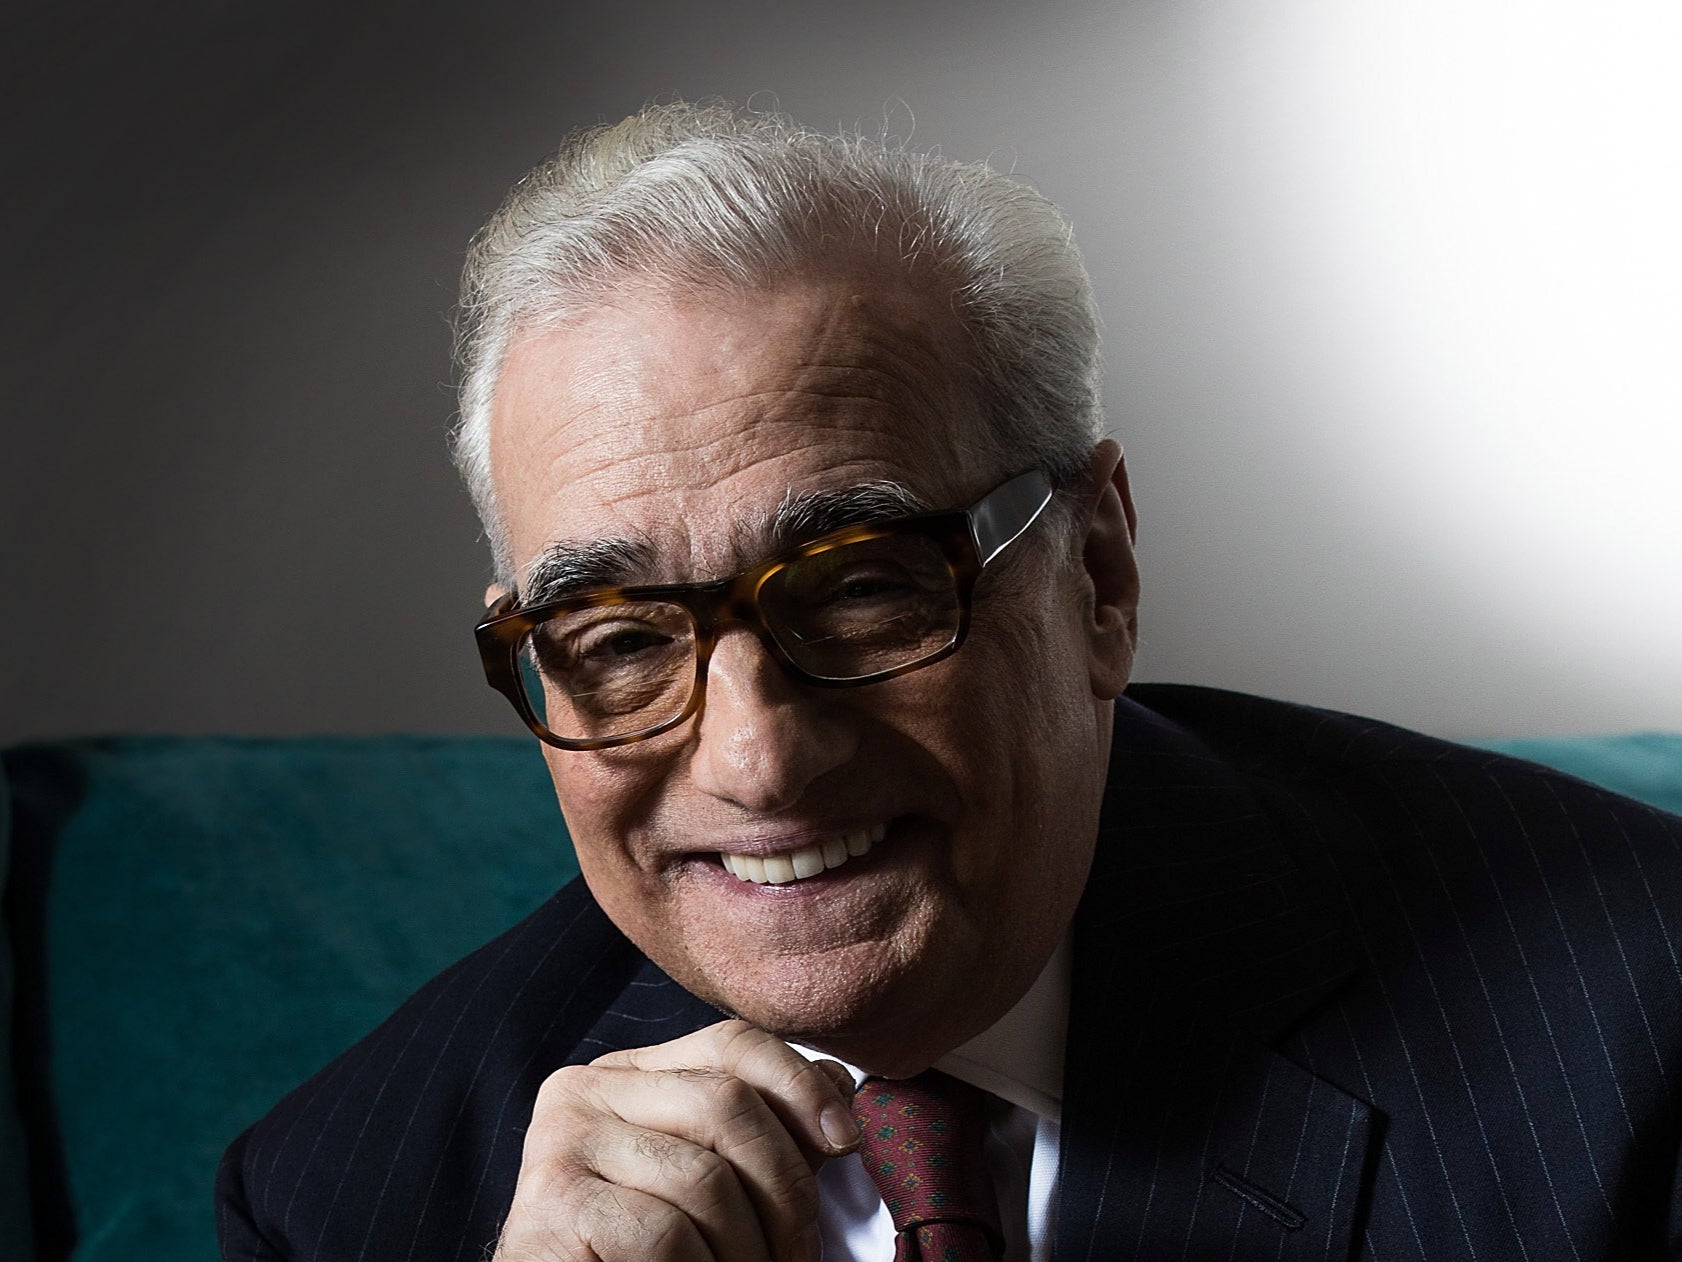 Martin Scorsese says he’s ‘thrilled’ to start work on ‘Killers of the Flower Moon’